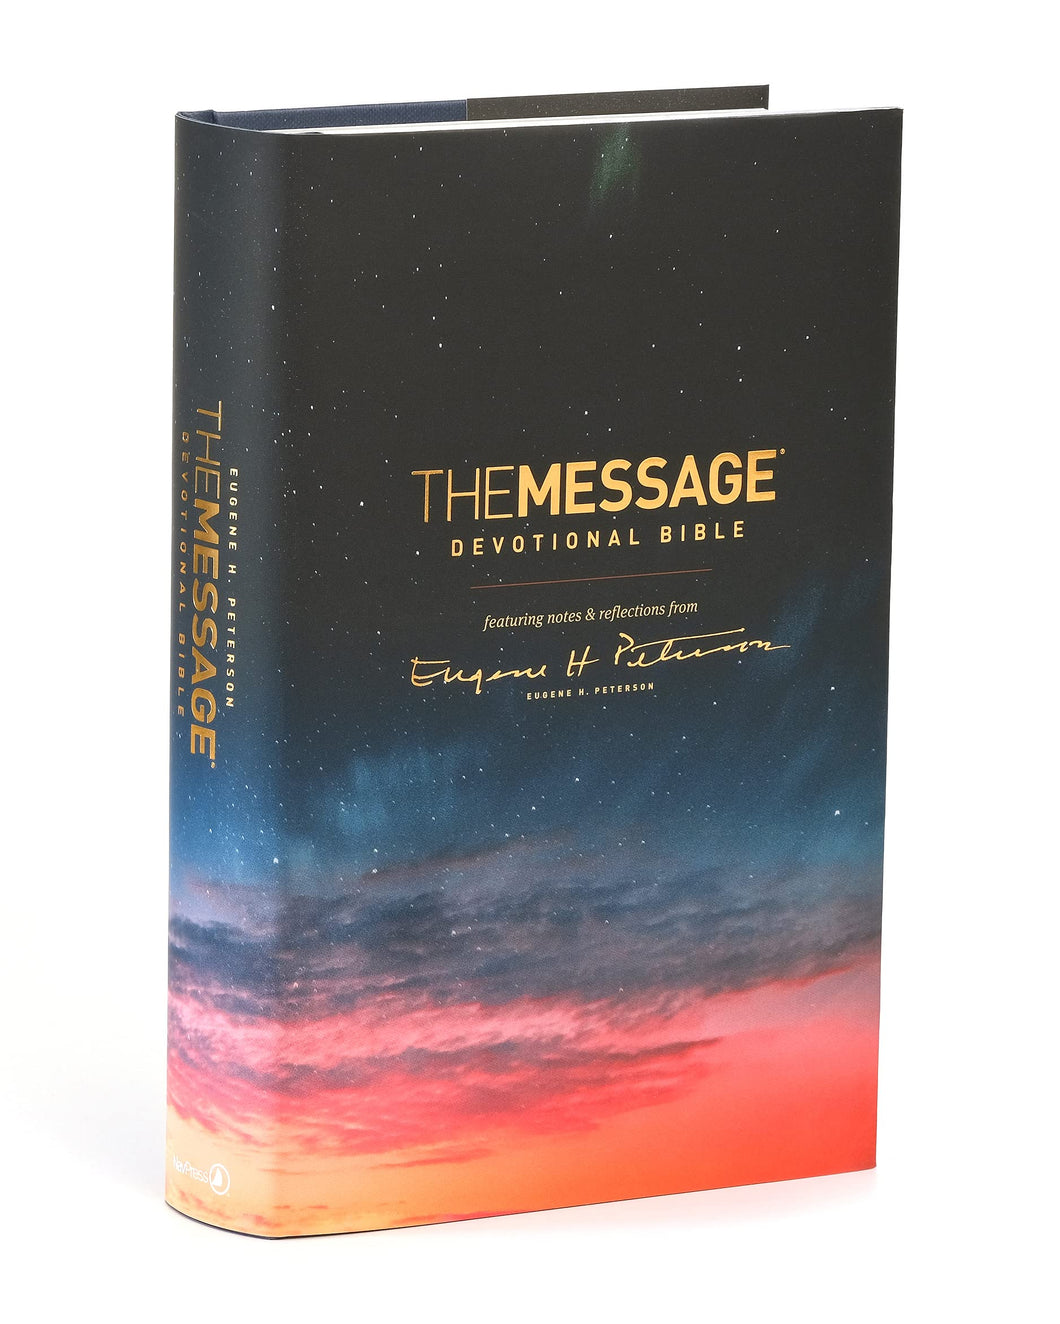 The Message Devotional Bible (Hardcover): Featuring Notes and Reflections from Eugene H. Peterson